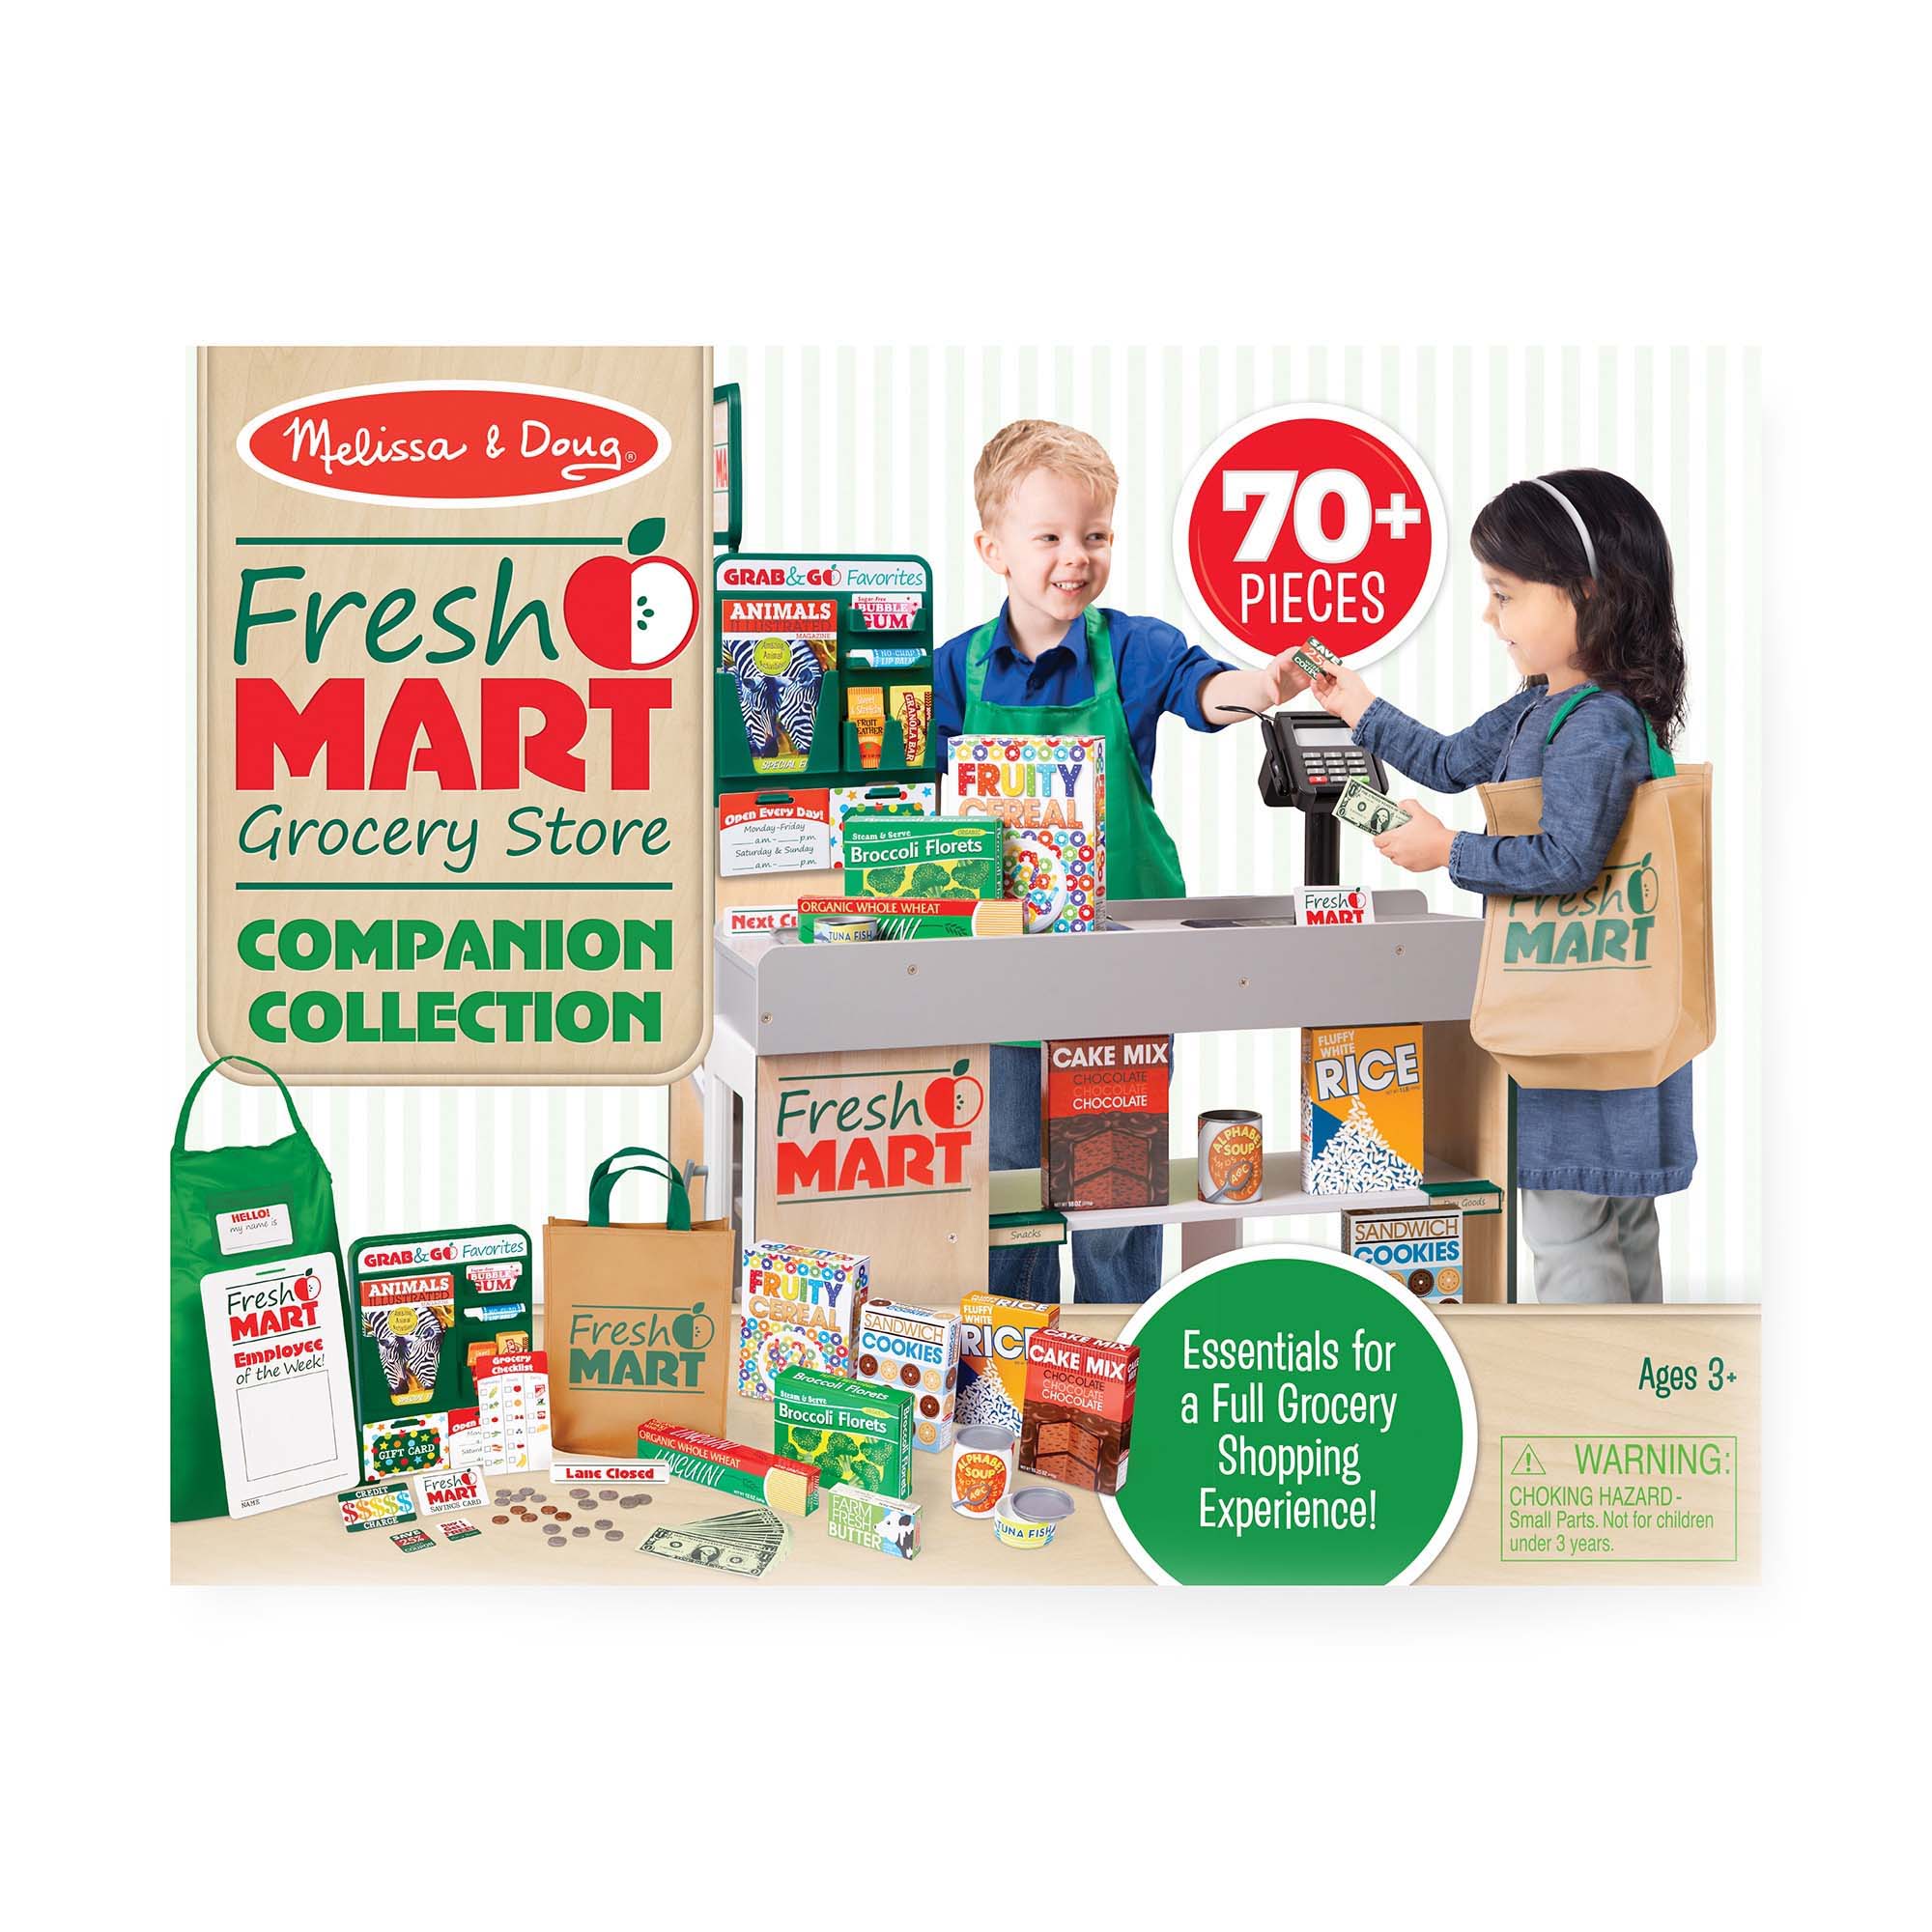 Fresh Mart Grocery Store Companion Collection, Play Sets & Kitchens, Multiple Role Play Items, Helps Develop Social Skil